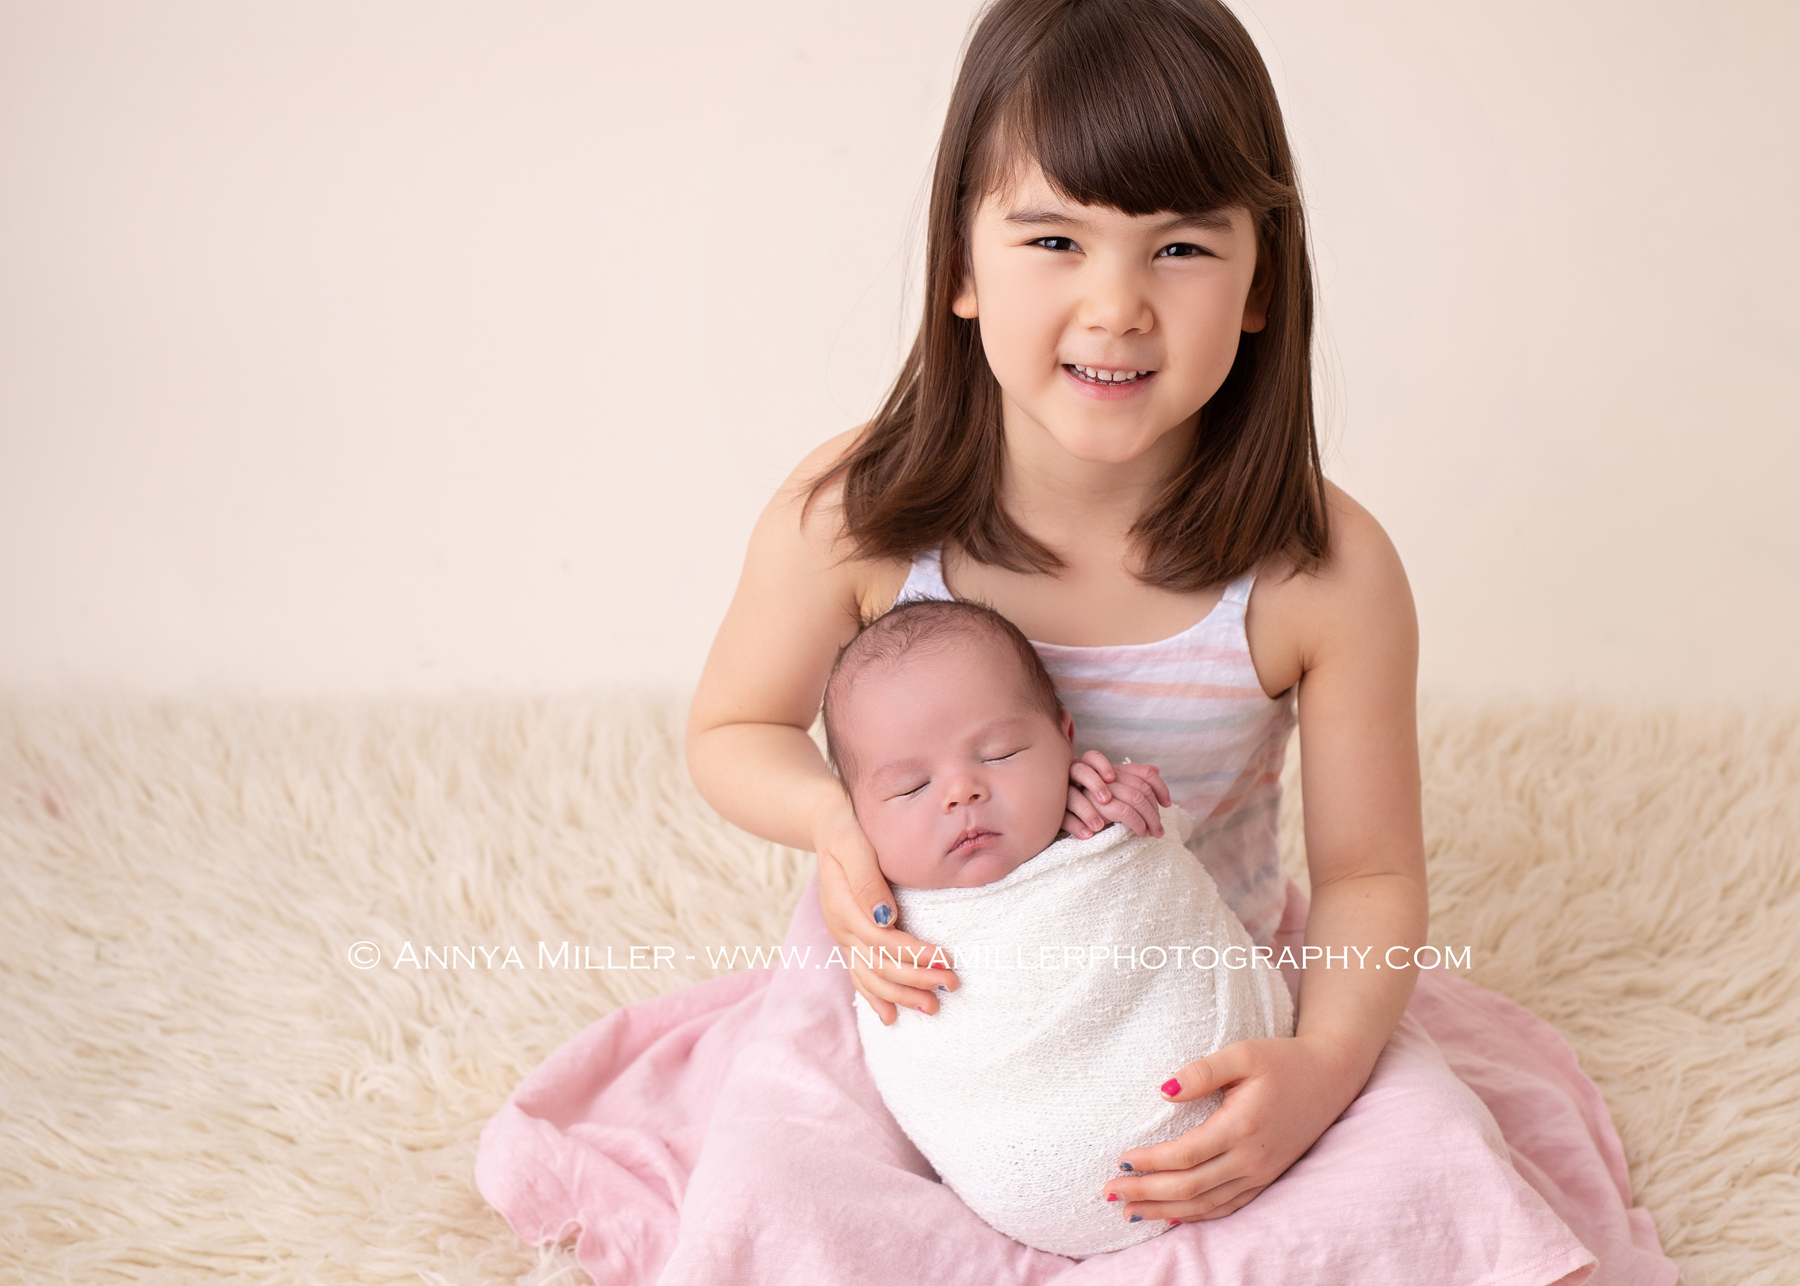 Older sister holding her baby brother in durham newborn photos